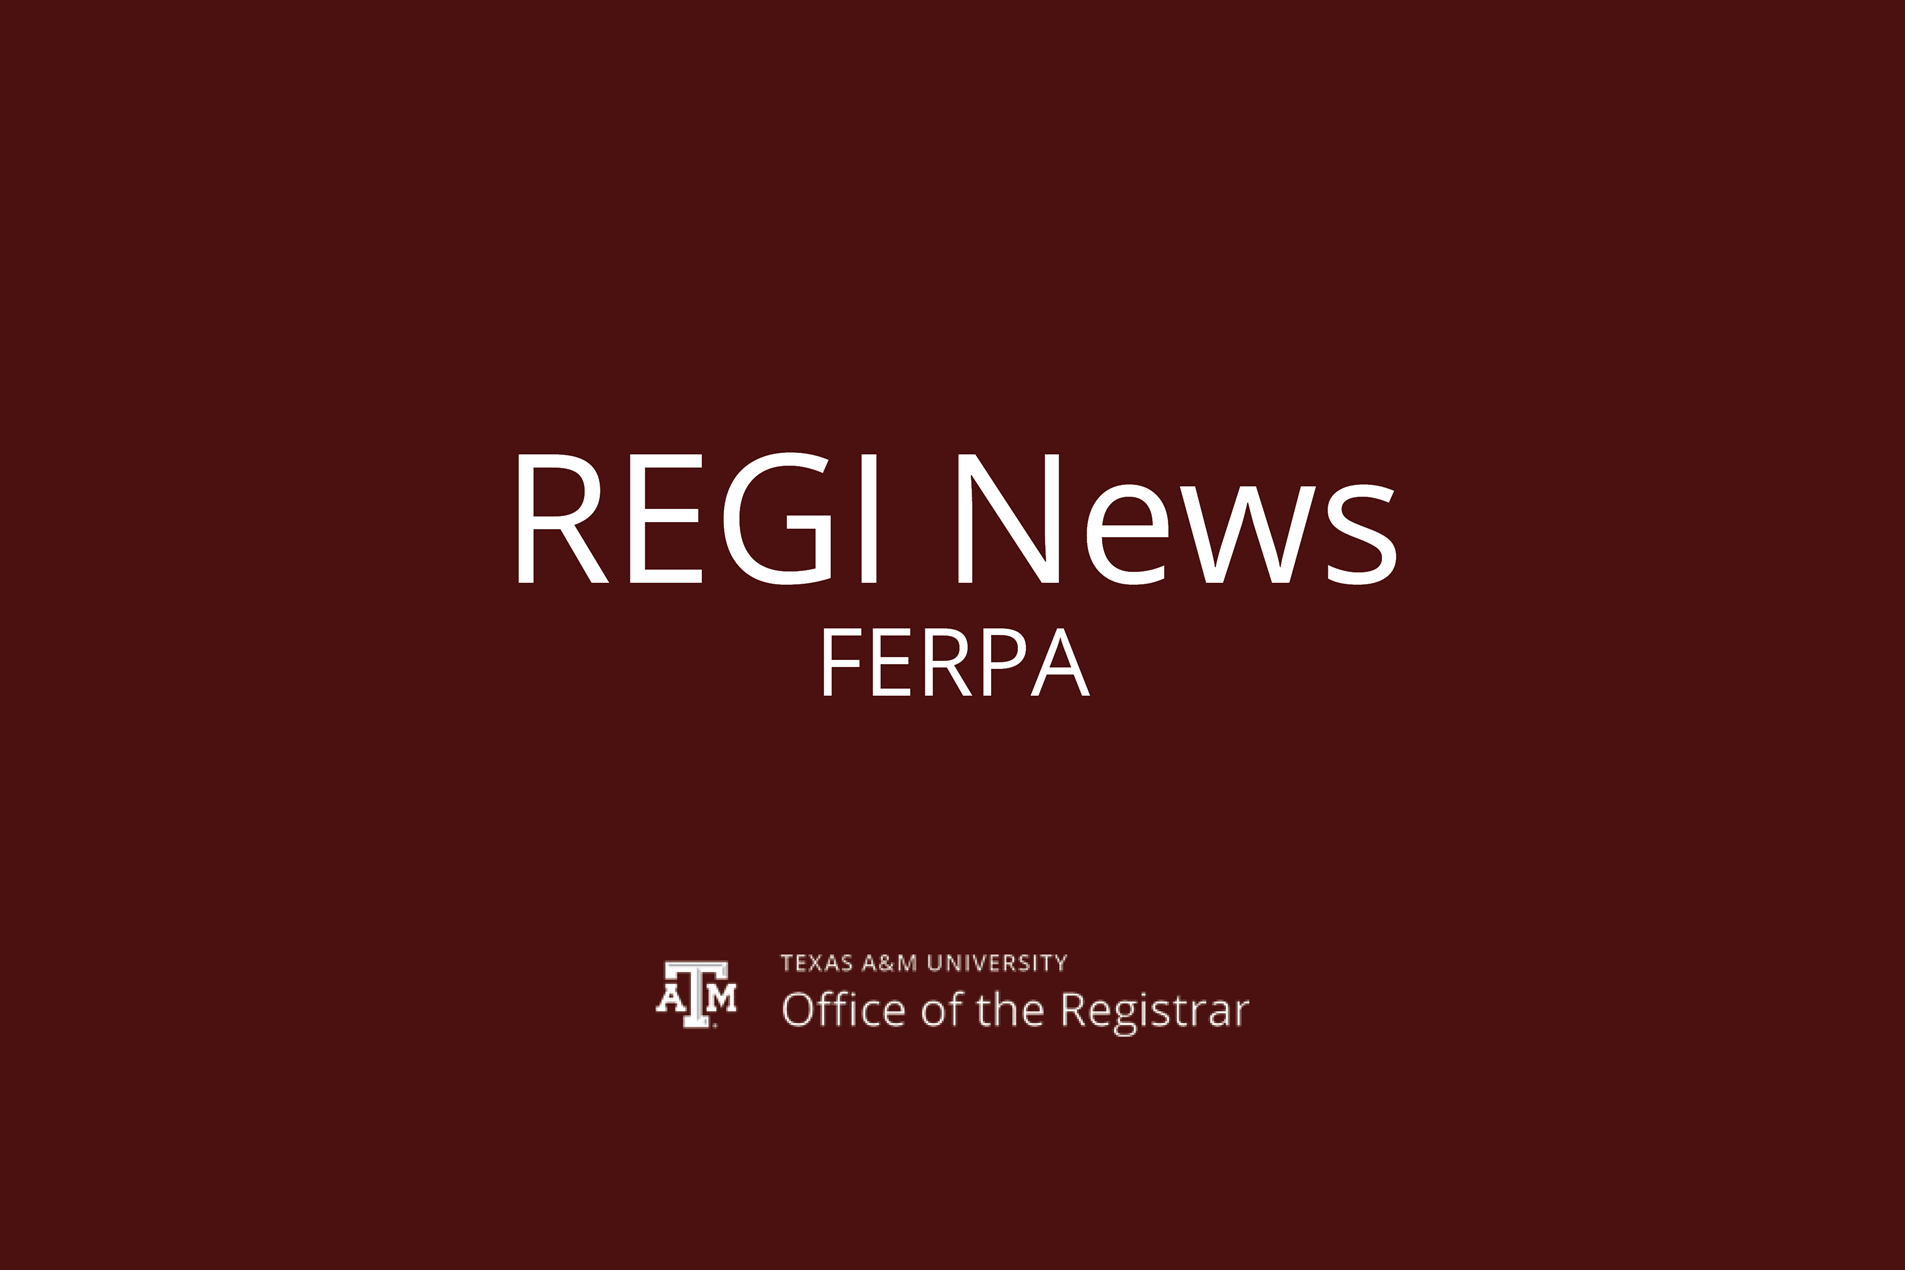 Friday Fun with FERPA, November 4, 2022 - FERPA and Research